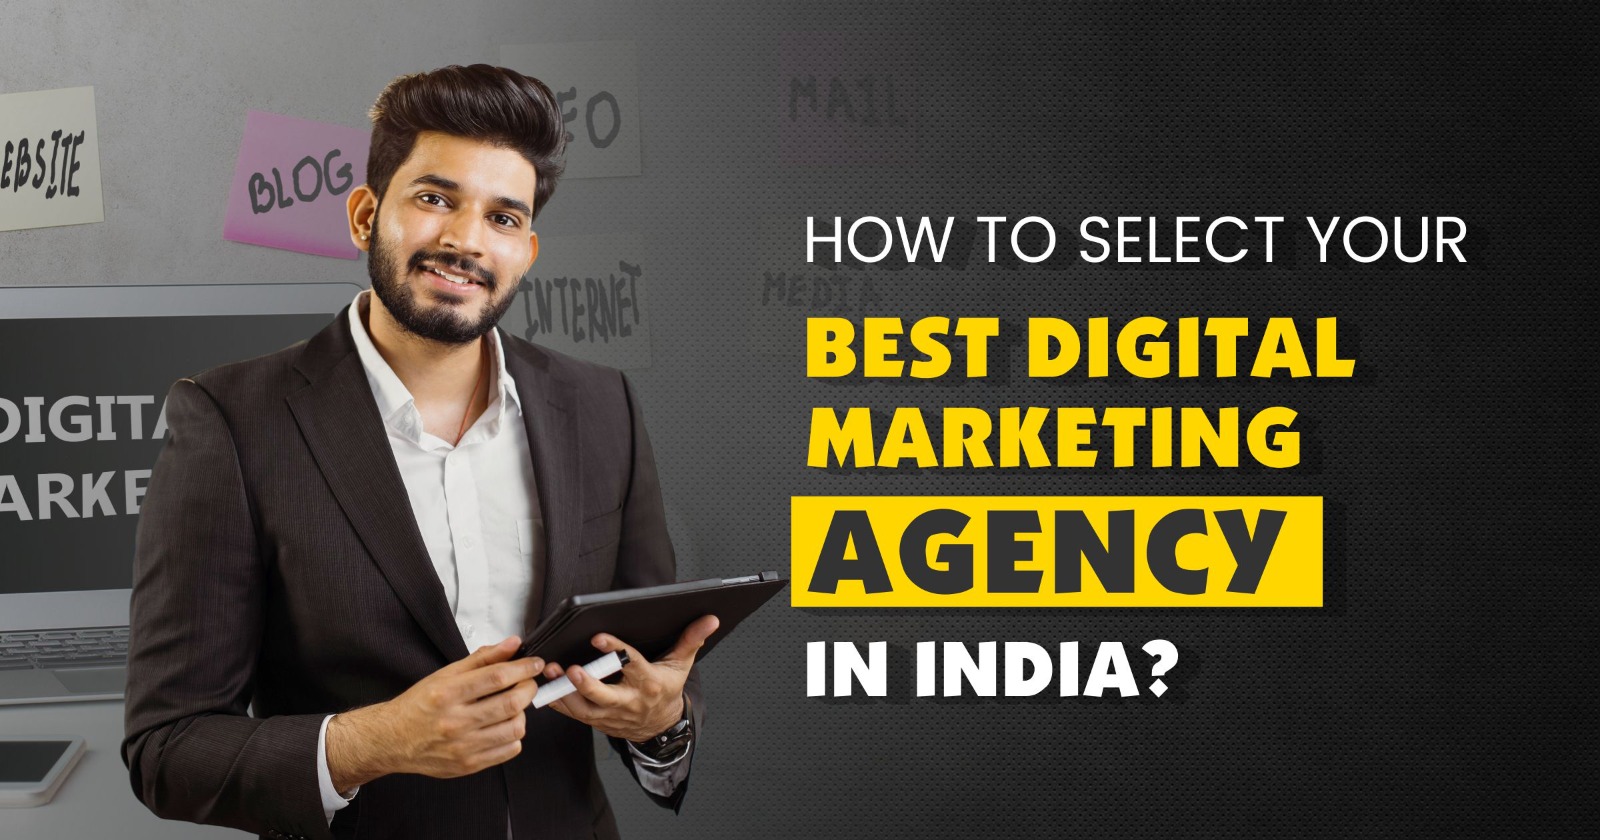 How to select the best digital marketing agency in India